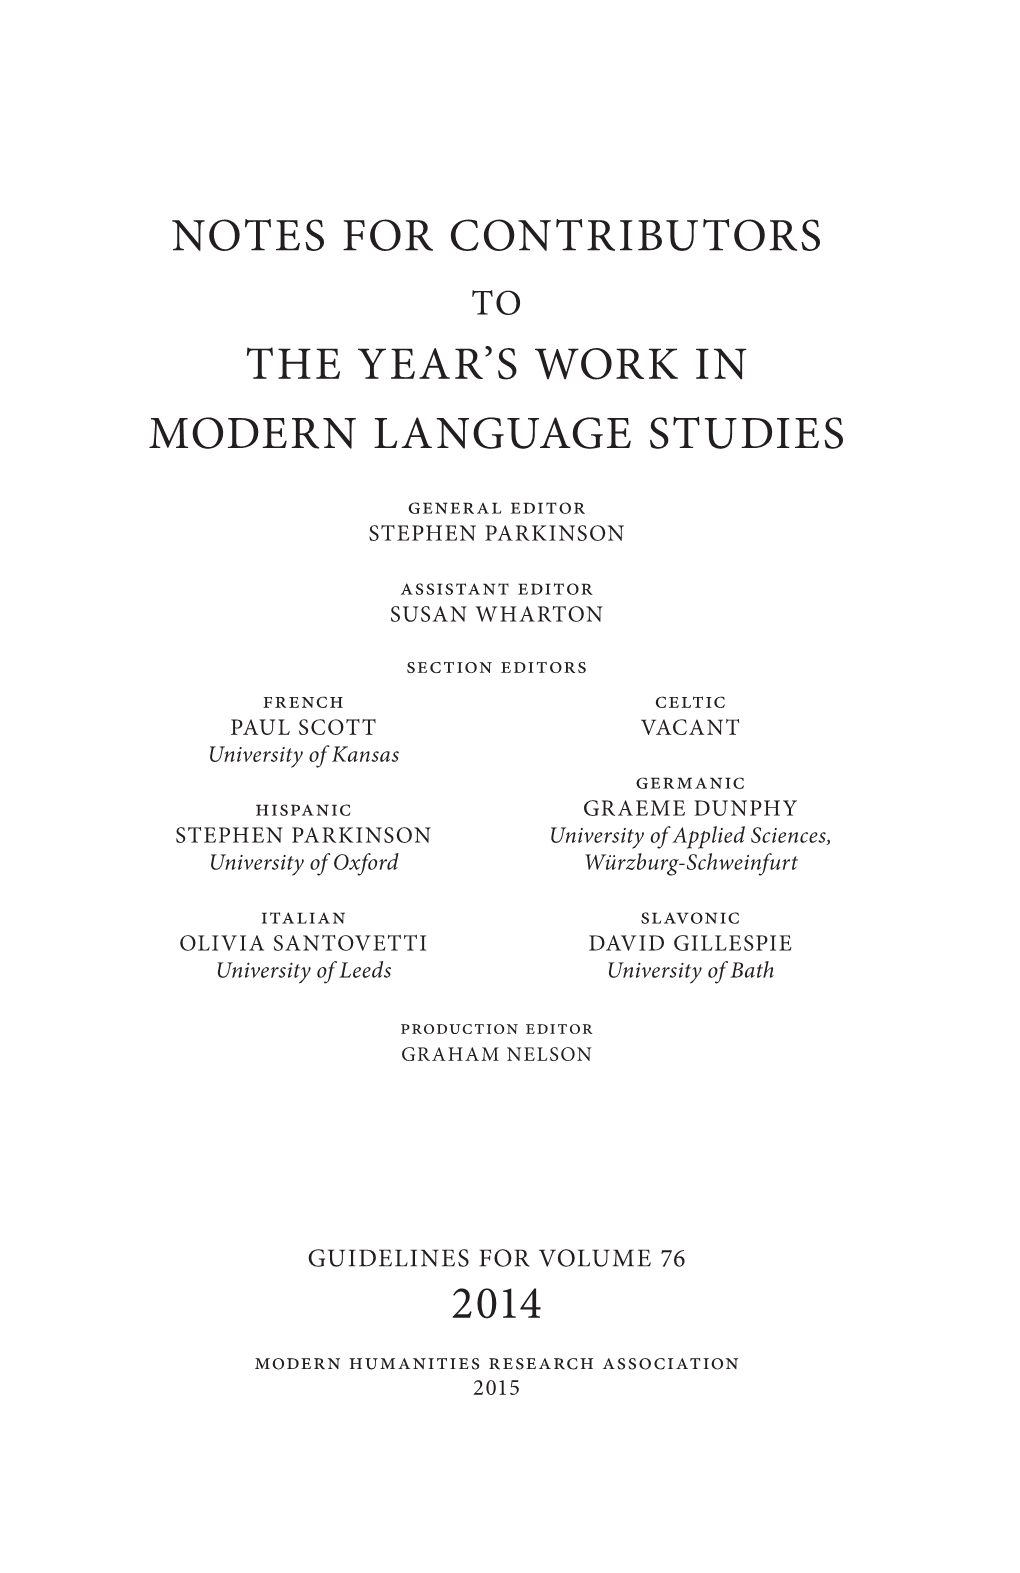 Notes for Contributors the Year's Work in Modern Language Studies 2014